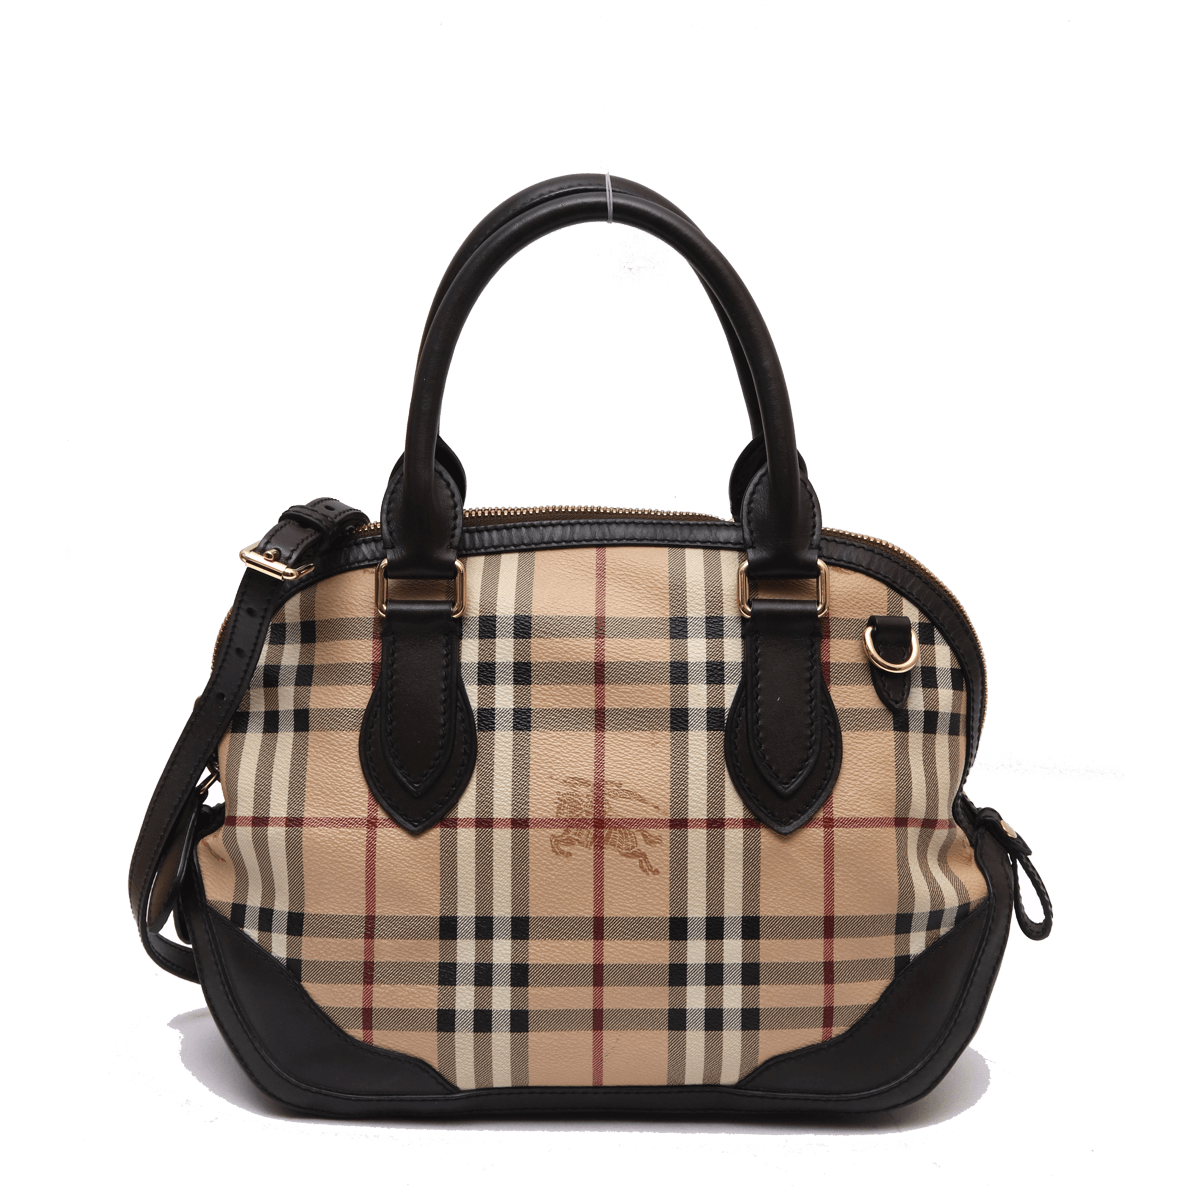 Burberry Pattern PNG Transparant Beeld